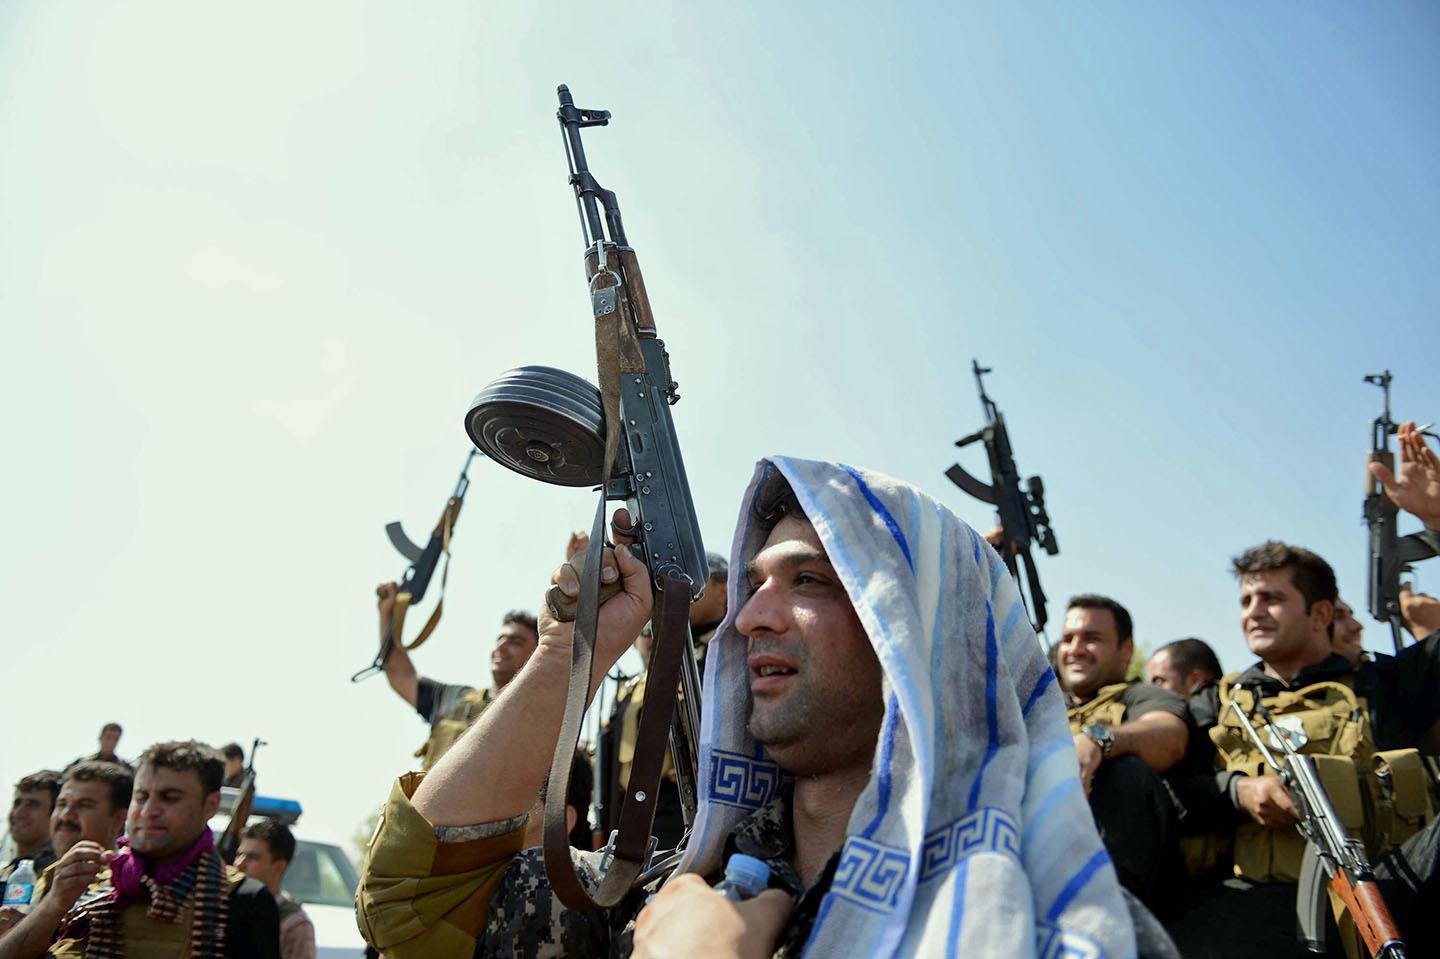 A militant Islamist fighter takes part in a military parade along the streets of Syria's northern Raqqa province.